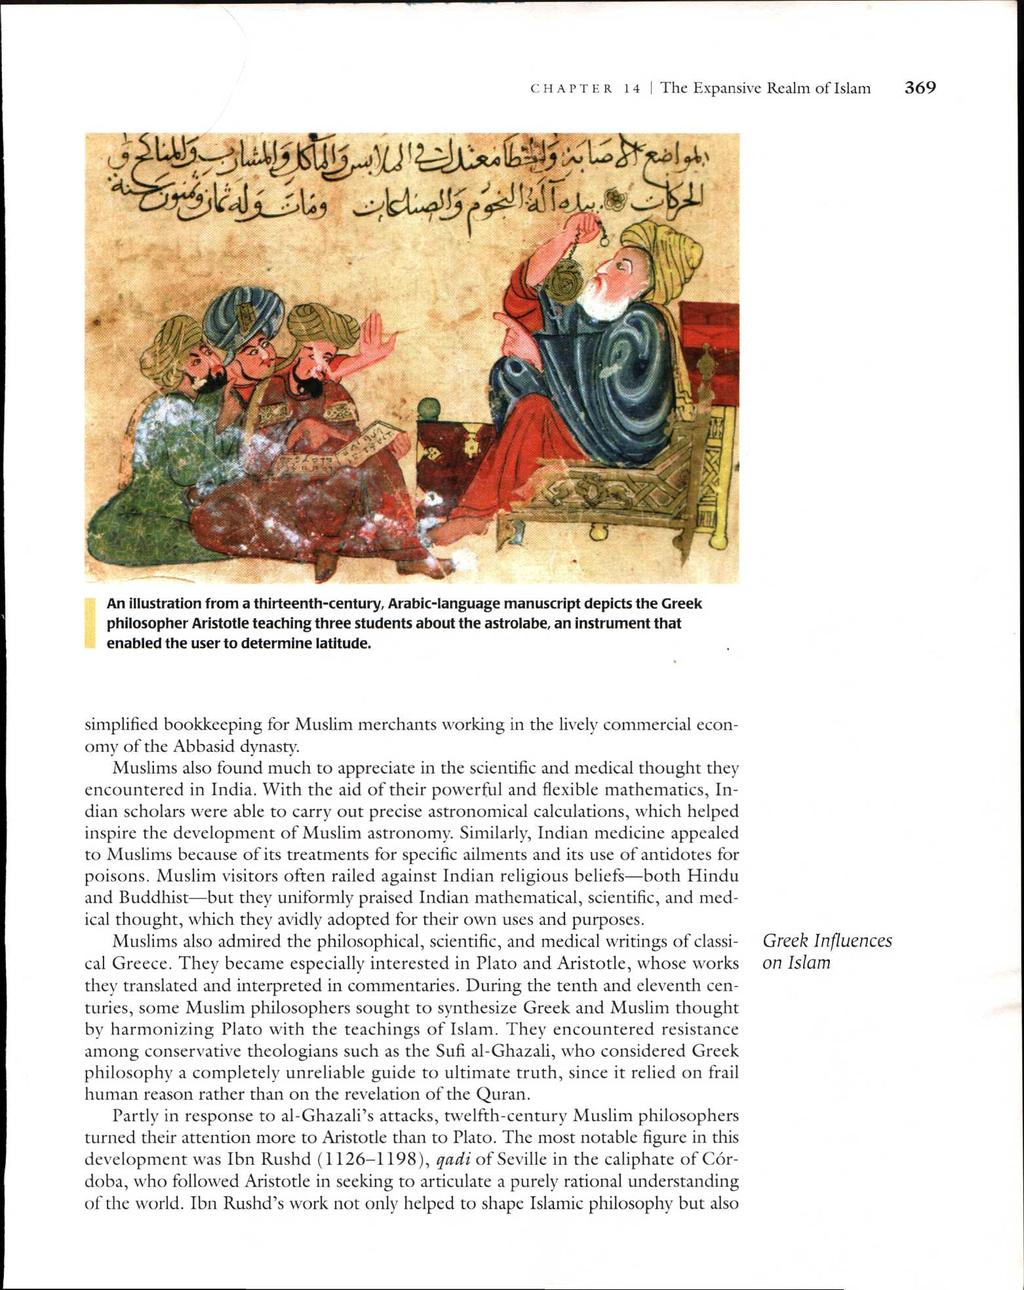 CHAPTER 14 I The Expansive Realm of Islam 369 An illustration from a thirteenth-century, Arabic-language manuscript depicts the Greek philosopher Aristotle teaching three students about the